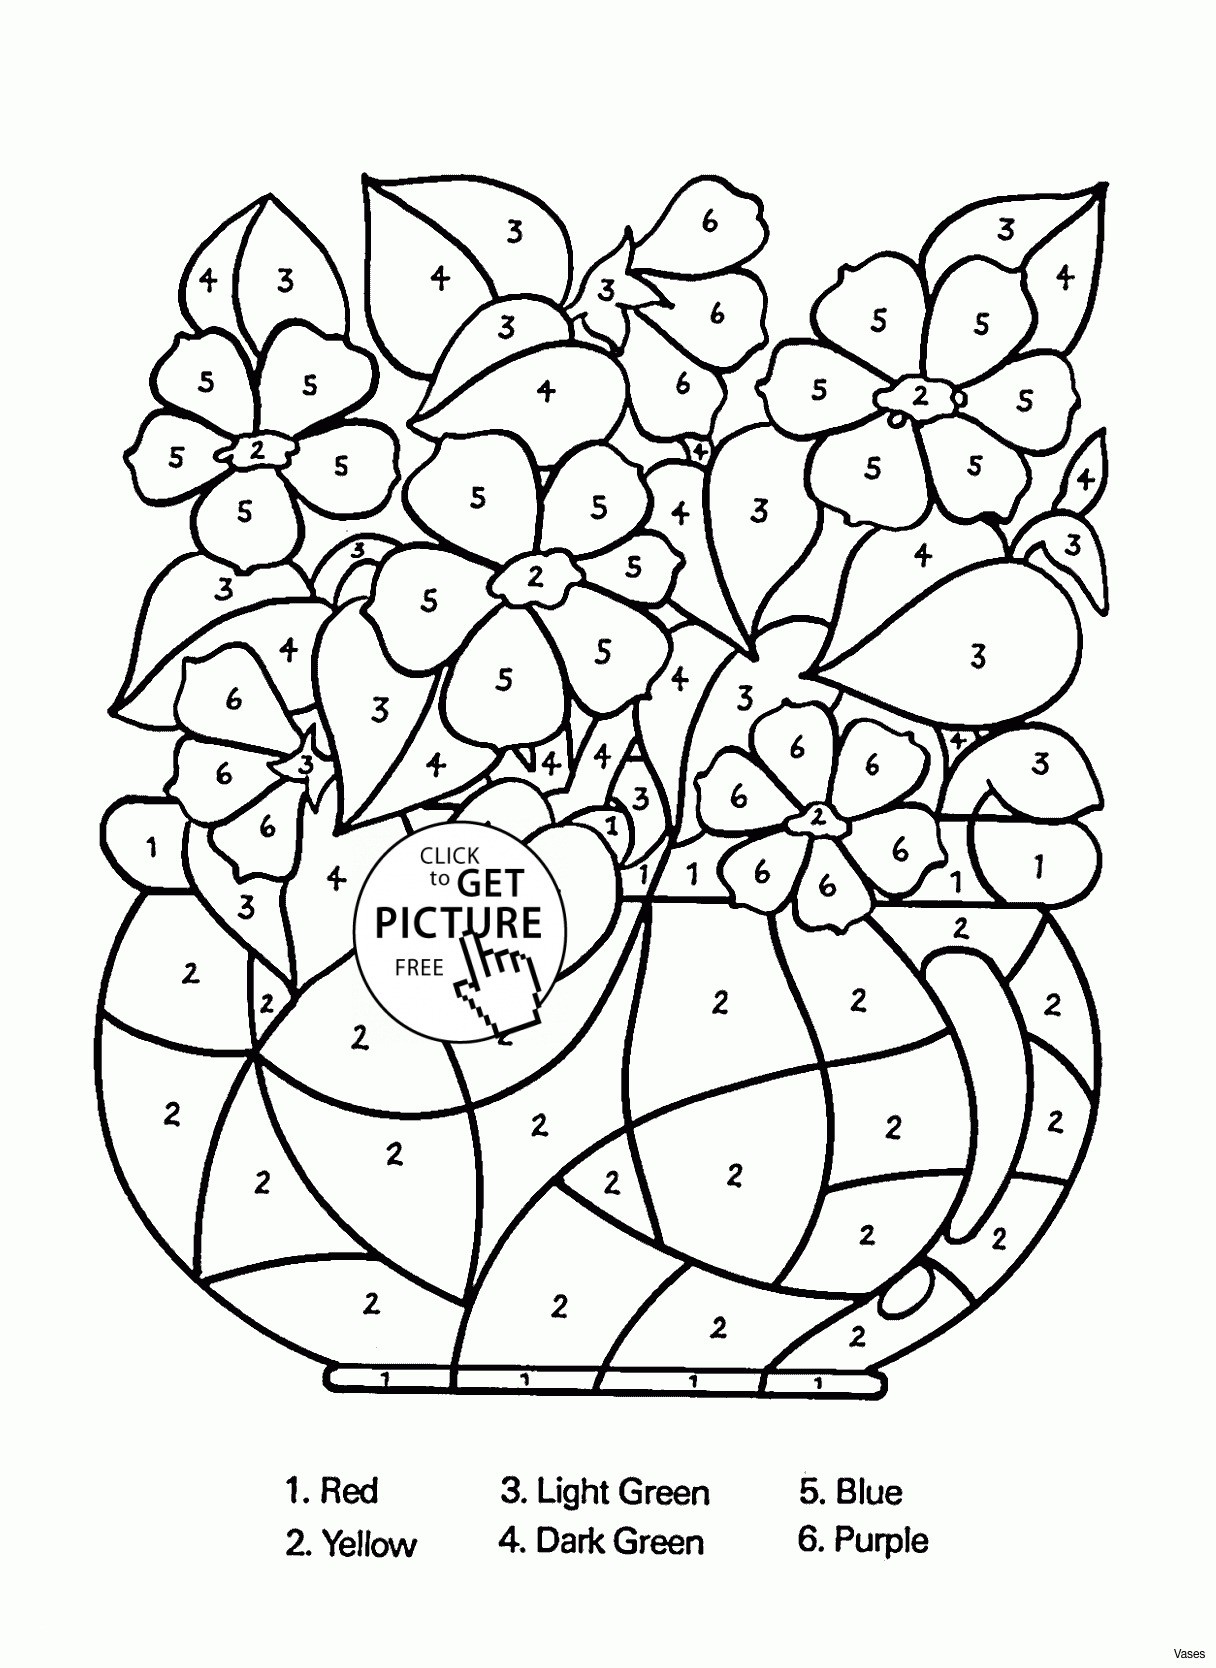 Children's Turkey Coloring Pages